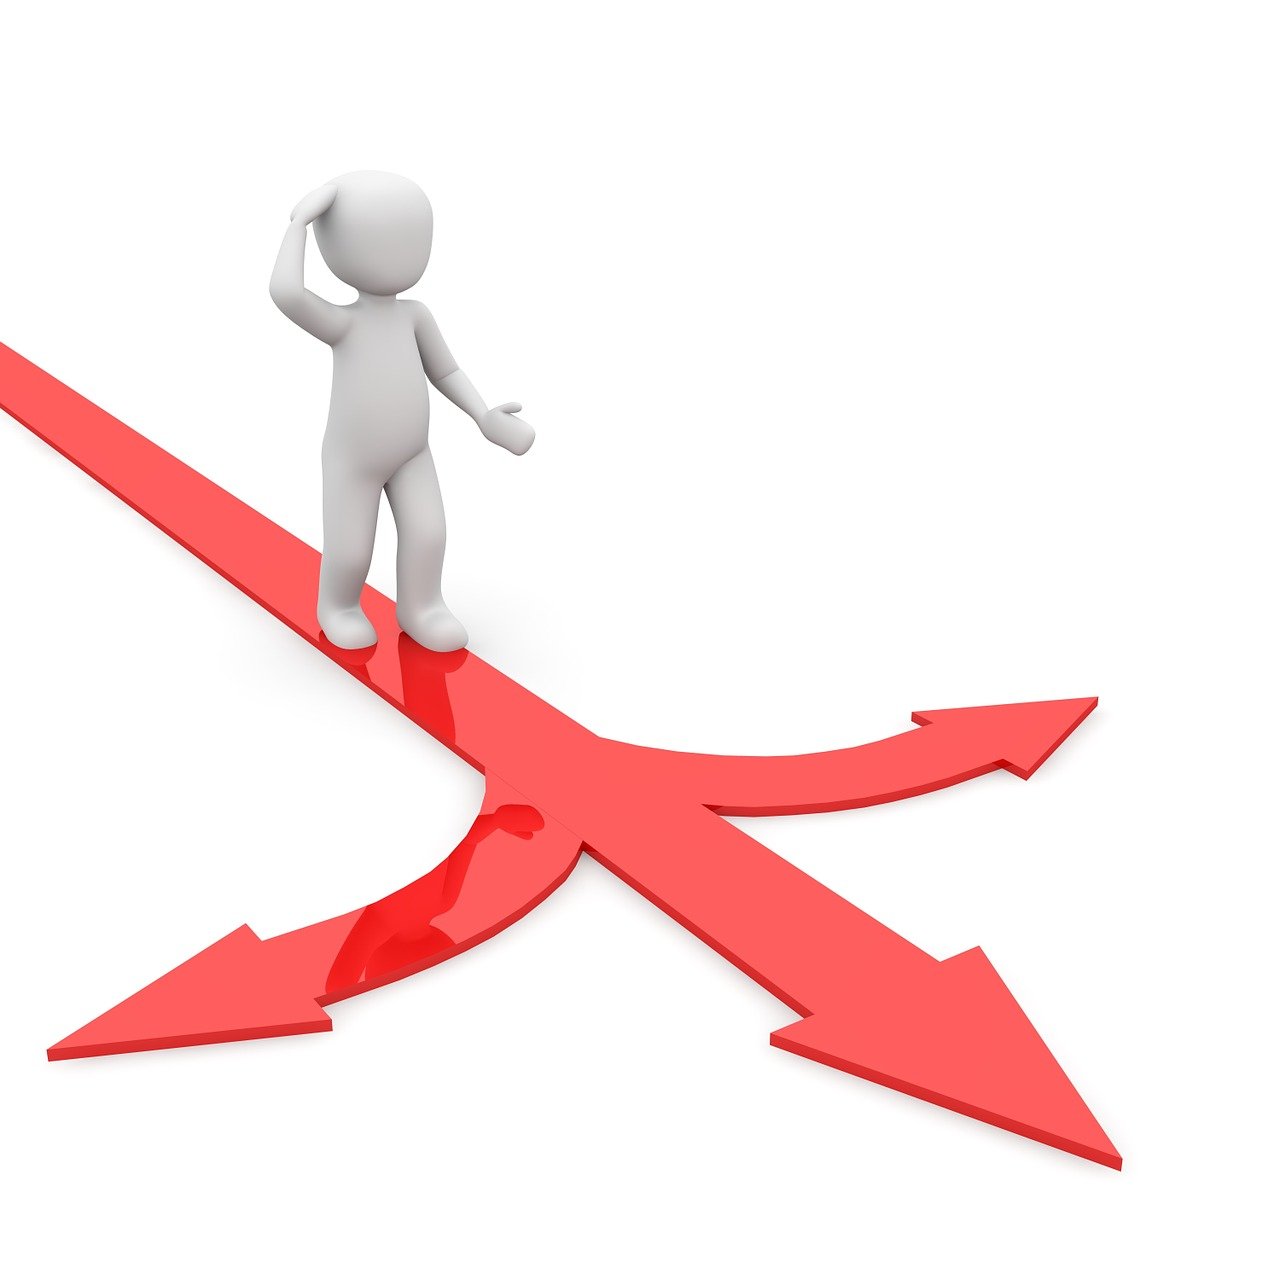 a person standing on top of a red arrow, a picture, realism, intercrossed, the right from wrong, cgtrader, crossover